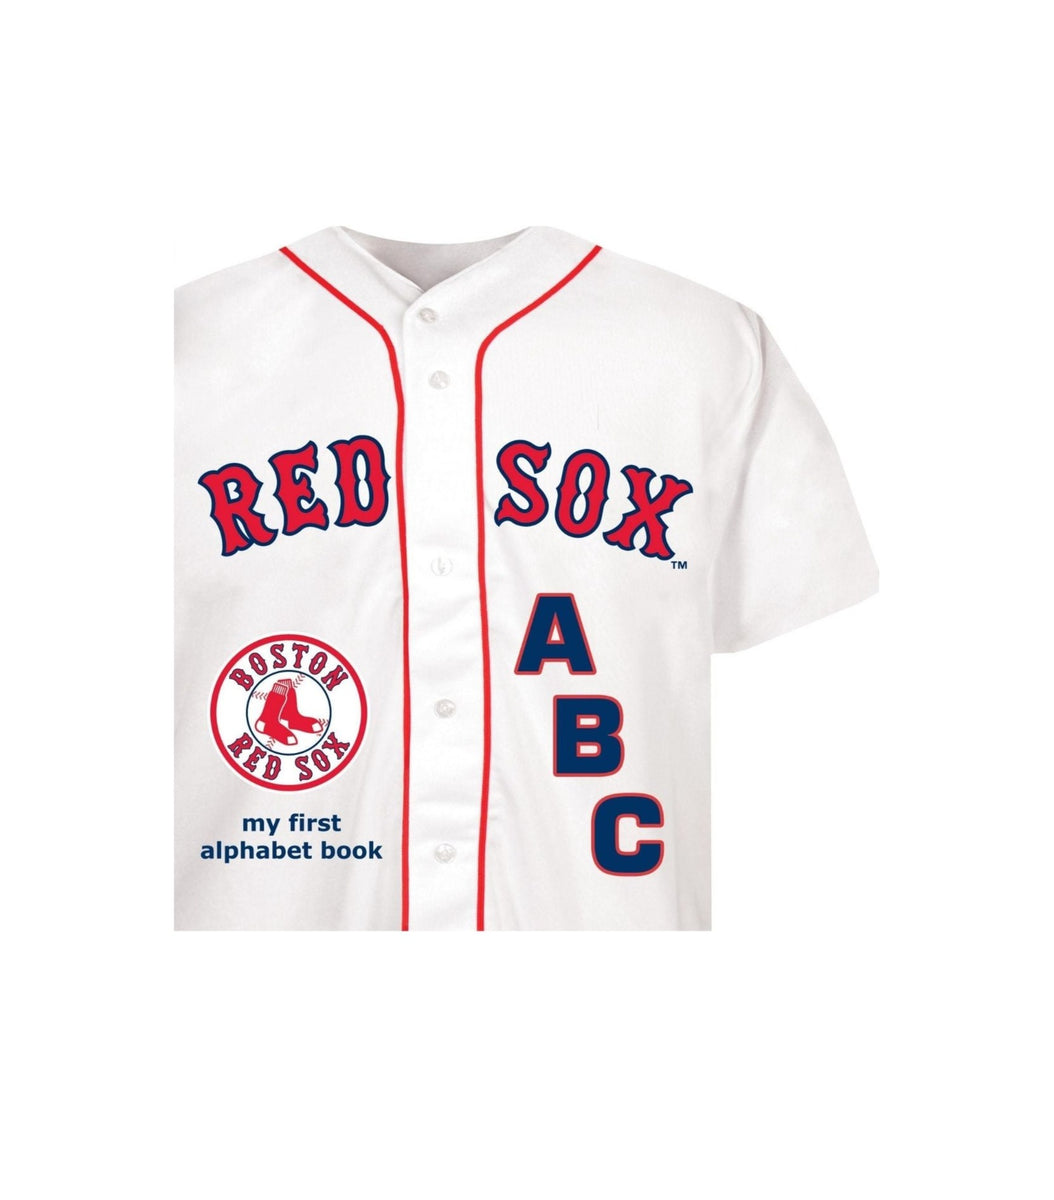 red sox lobster shirt